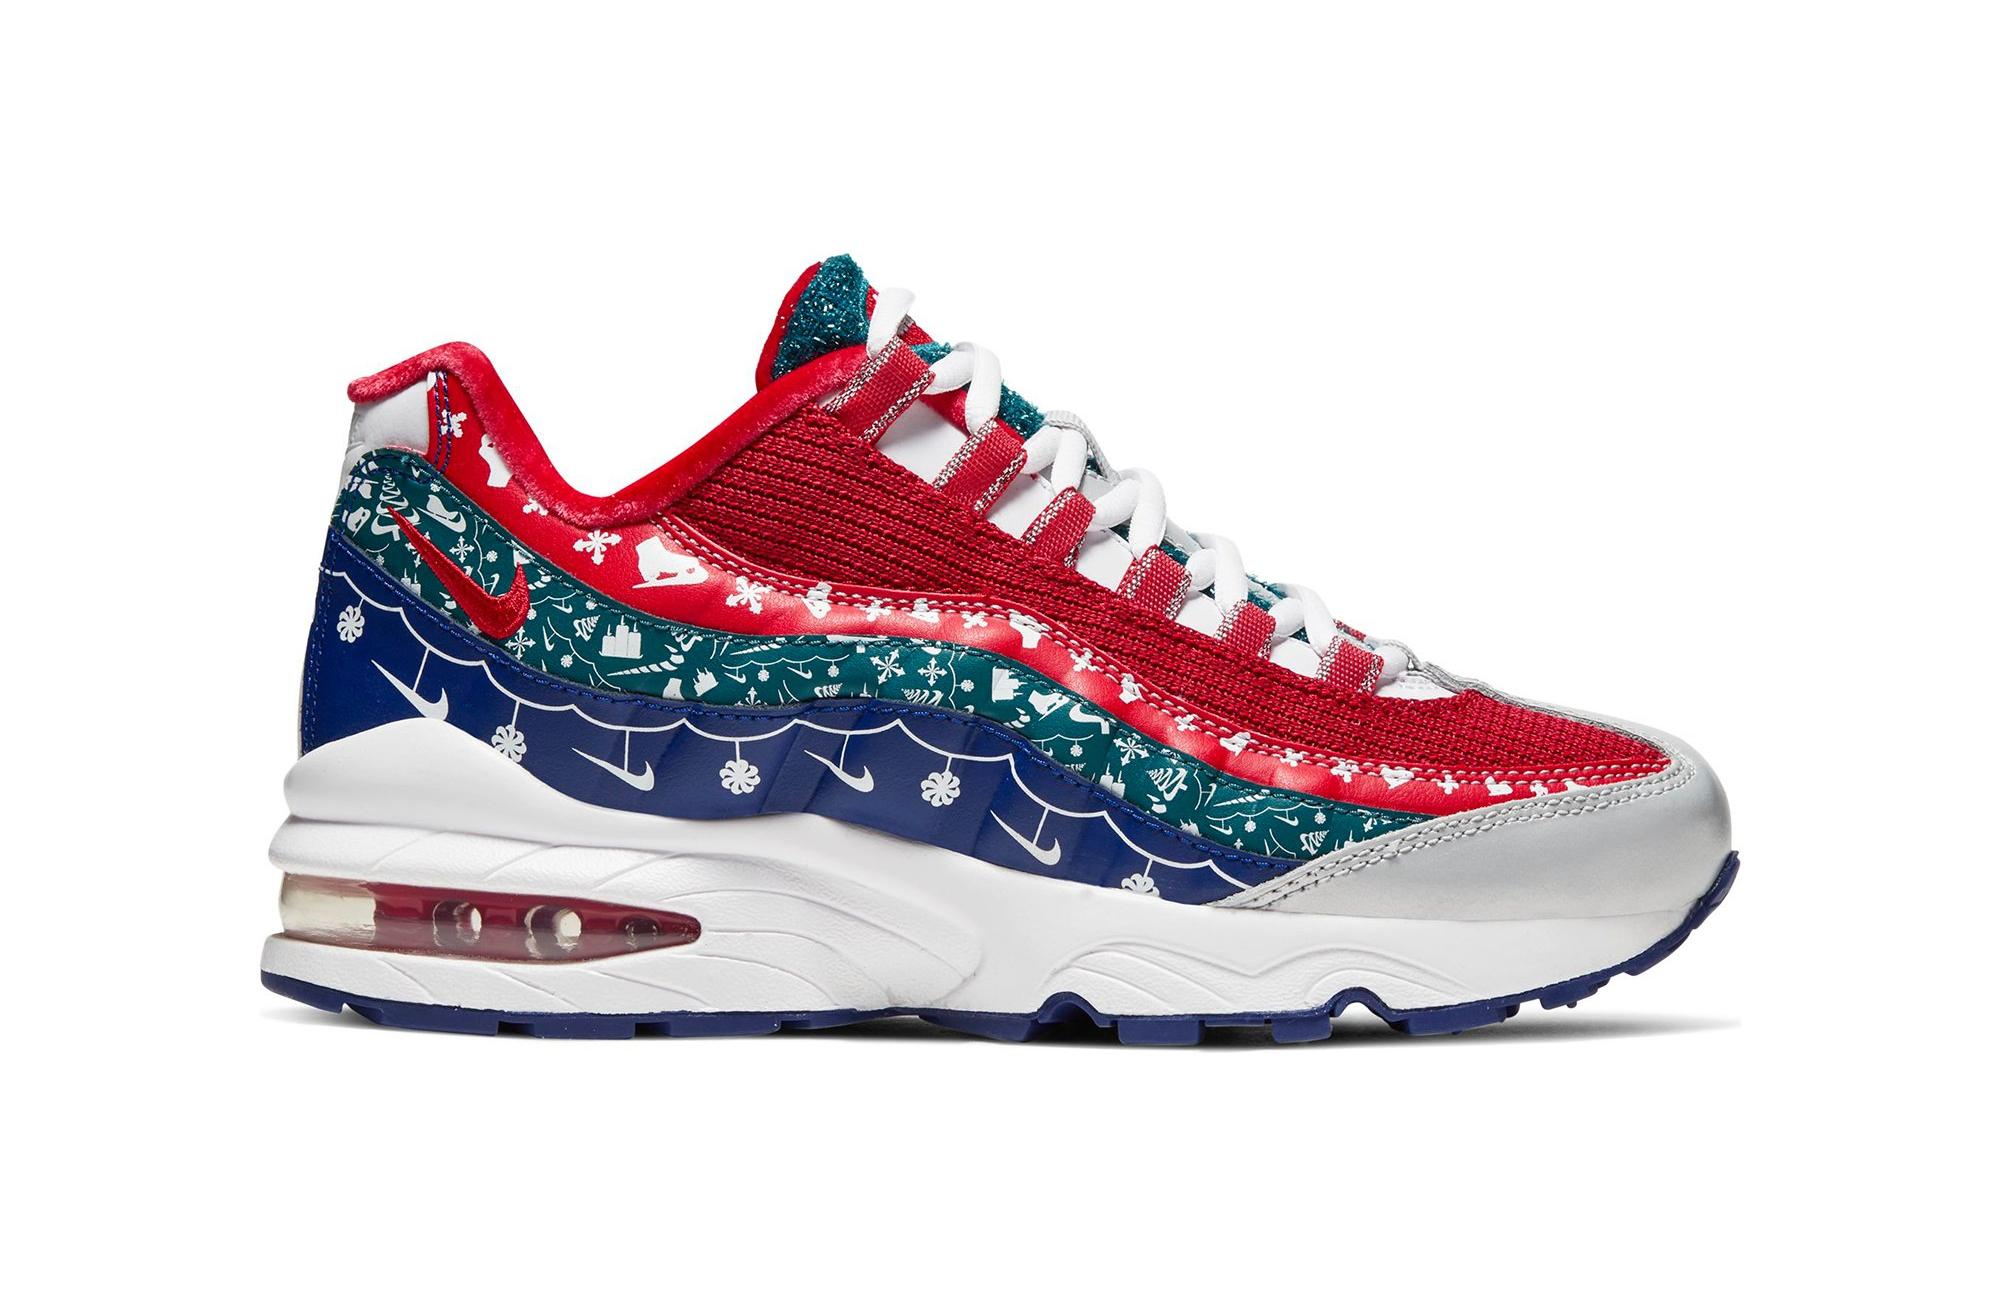 Sneakers Release Nike Air Max 95 “Christmas White/Red